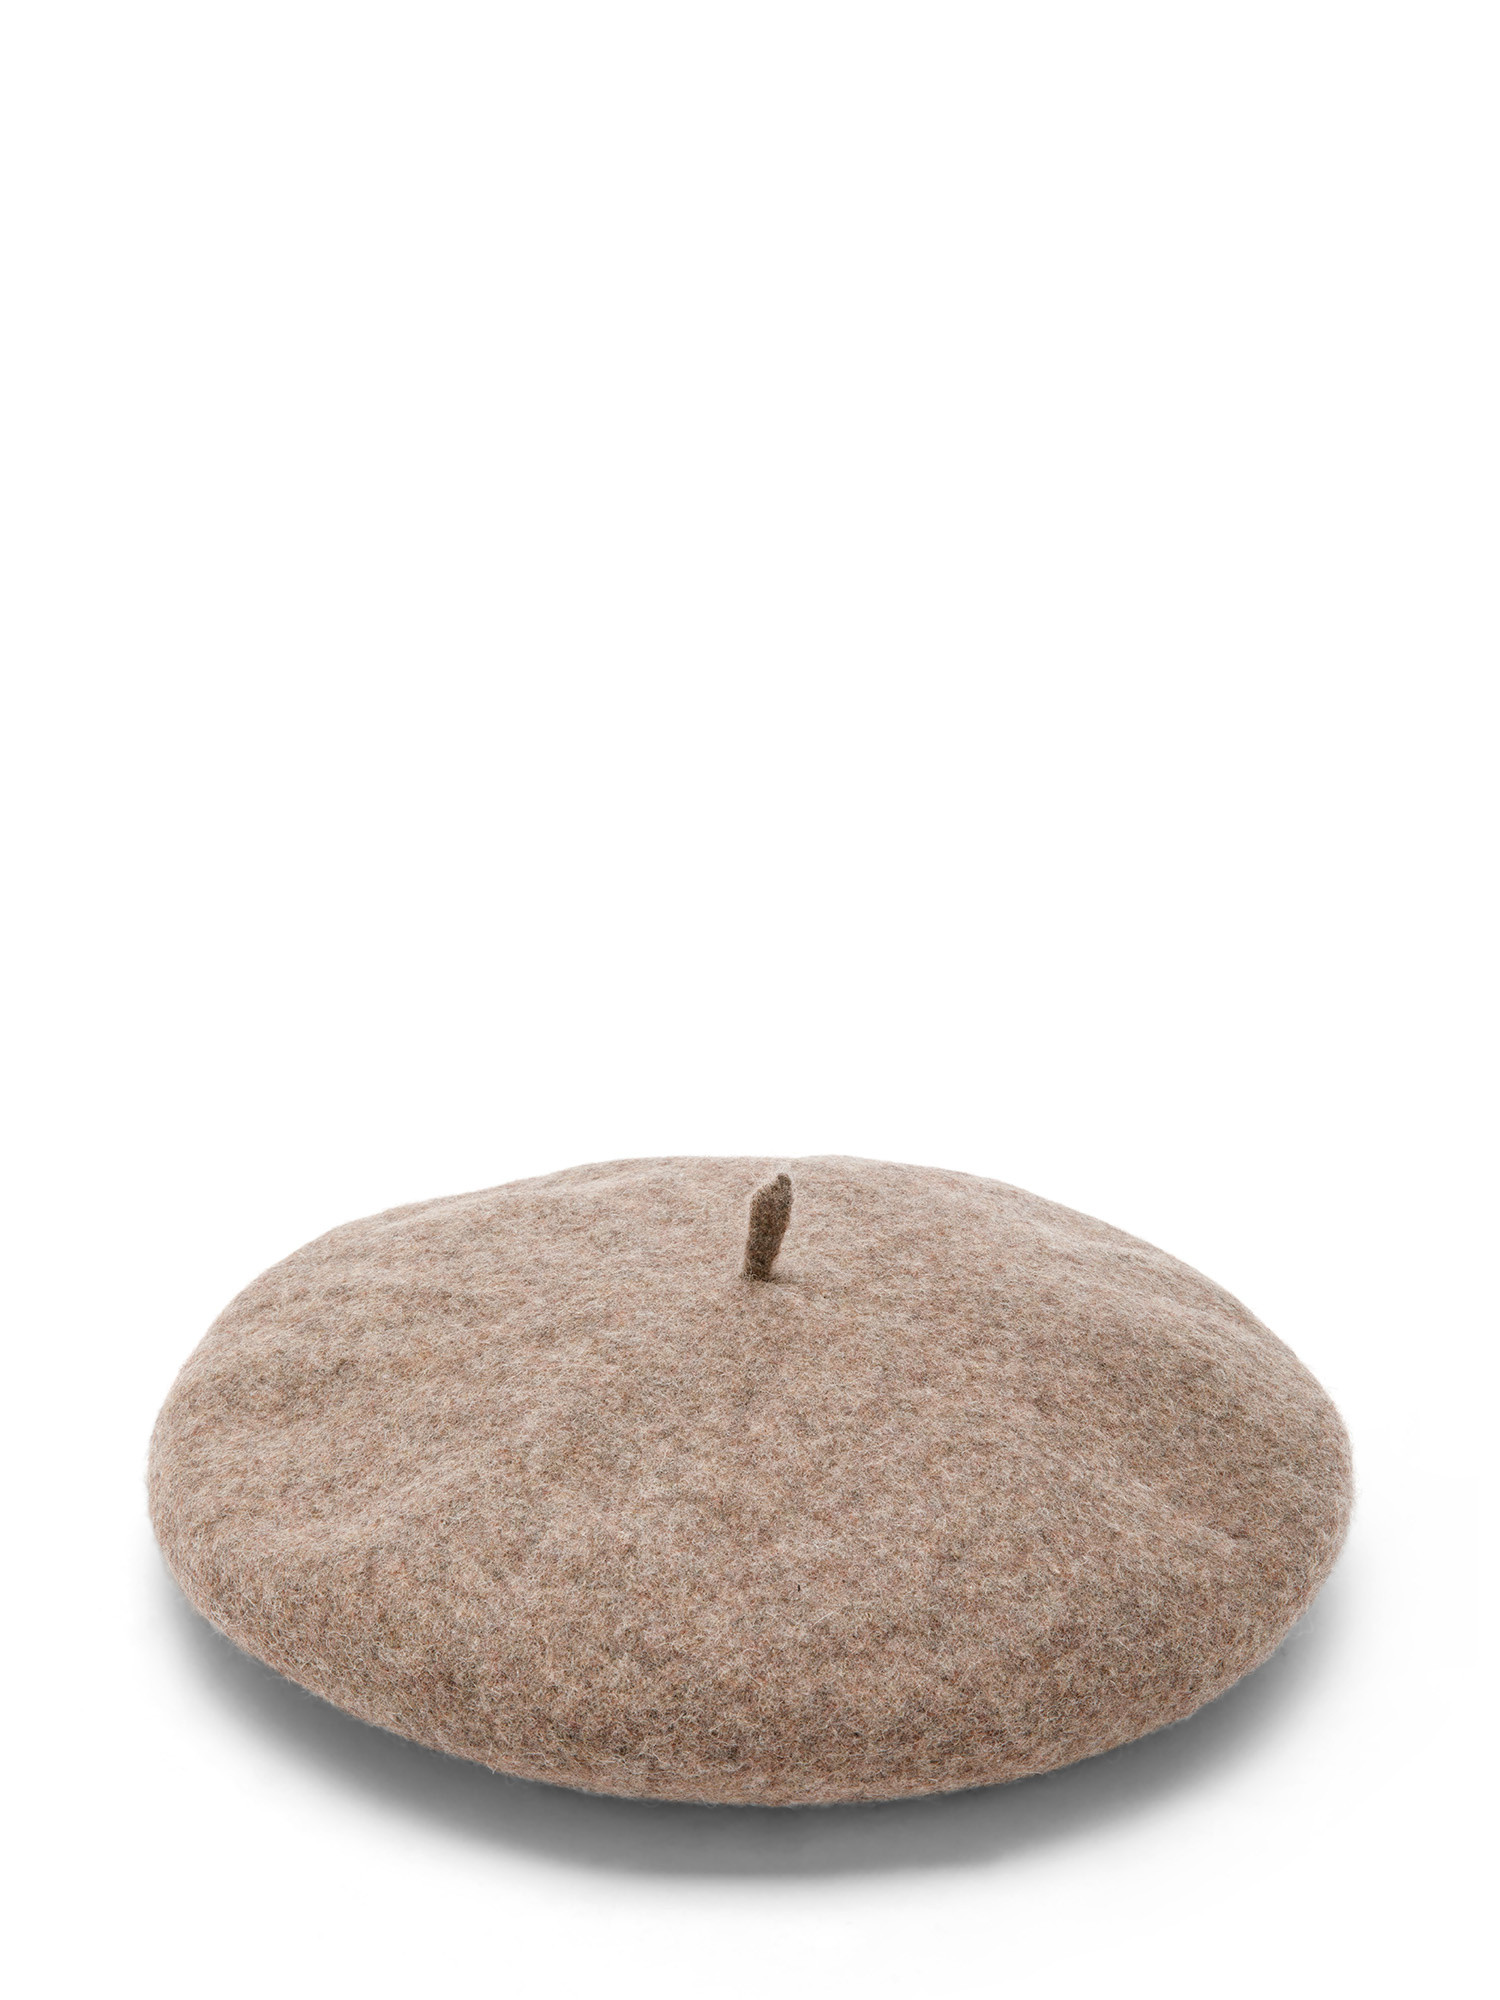 Koan - Pure wool beret, TAUPE, large image number 0